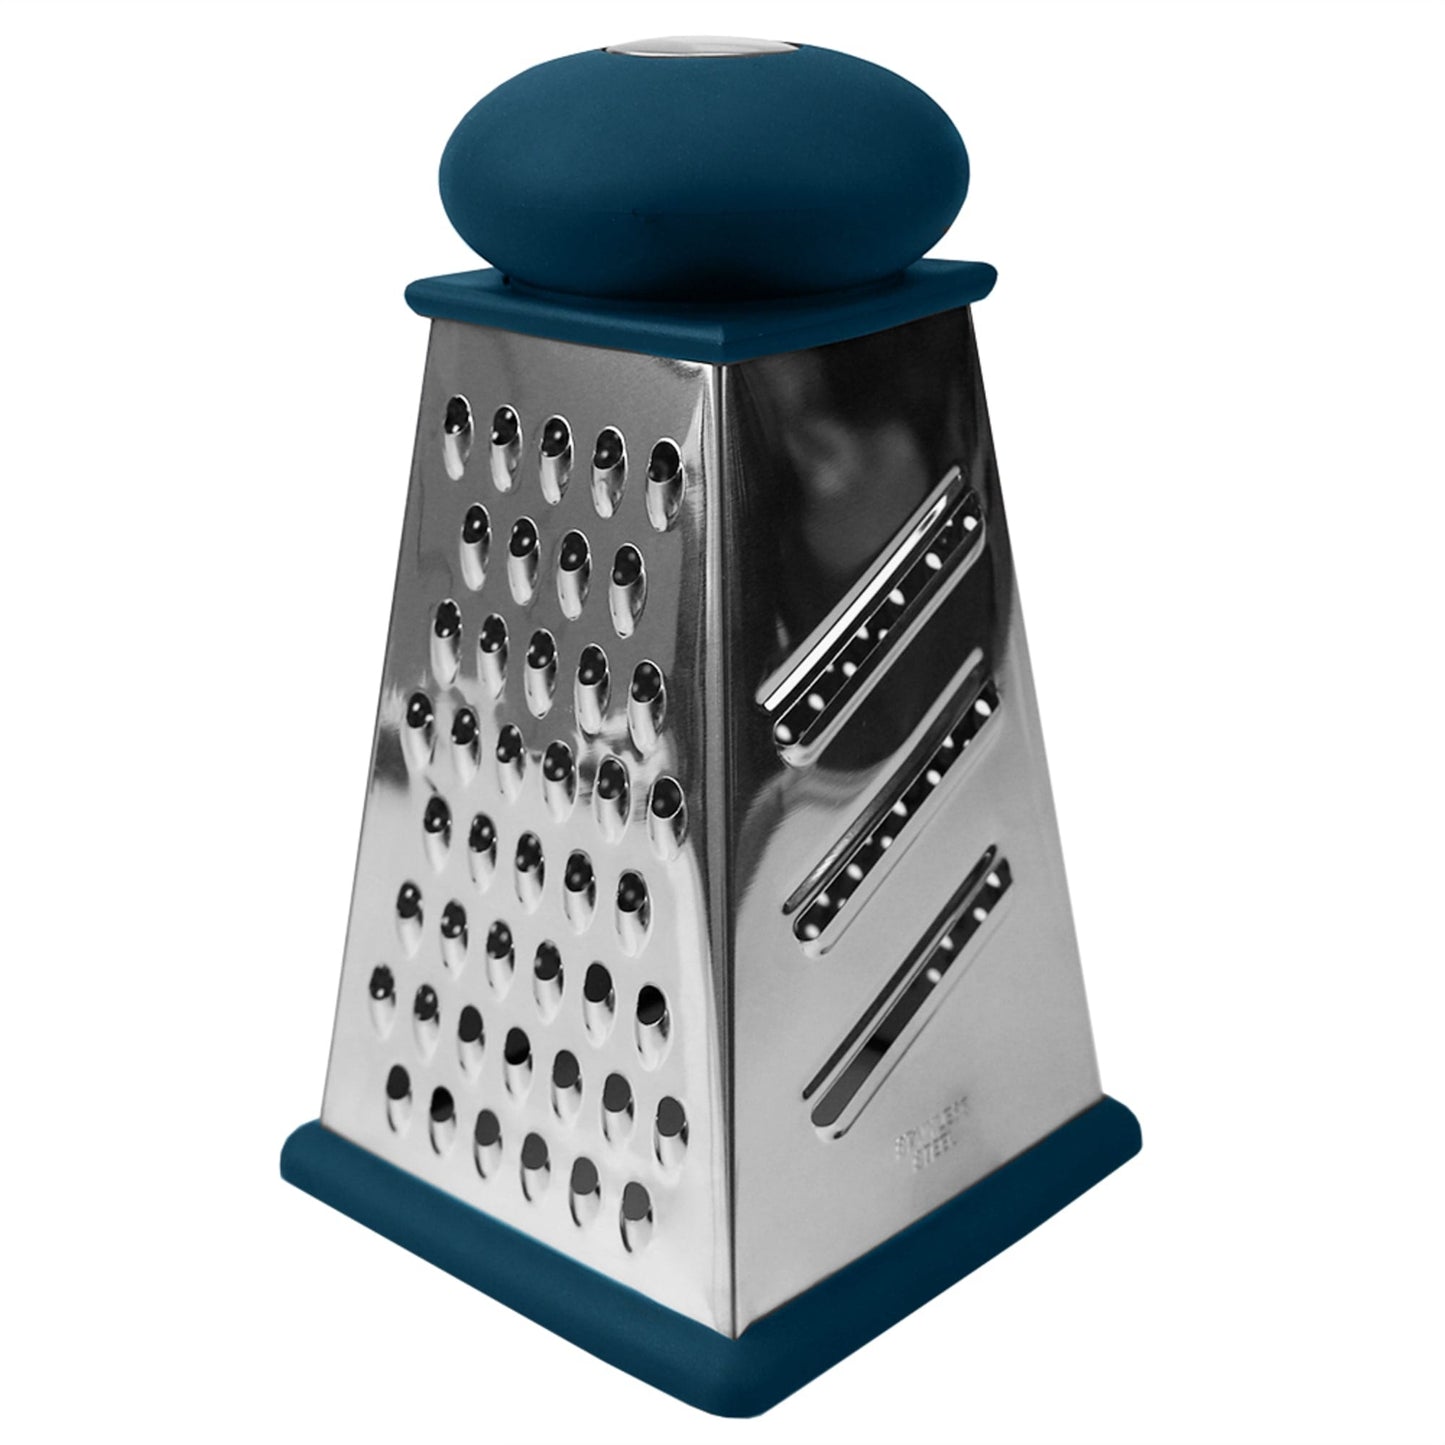 Michael Graves Design Comfortable Grip Non-Skid  Pyramid Shaped Stainless Steel Box Cheese Grater with Handle,  Indigo